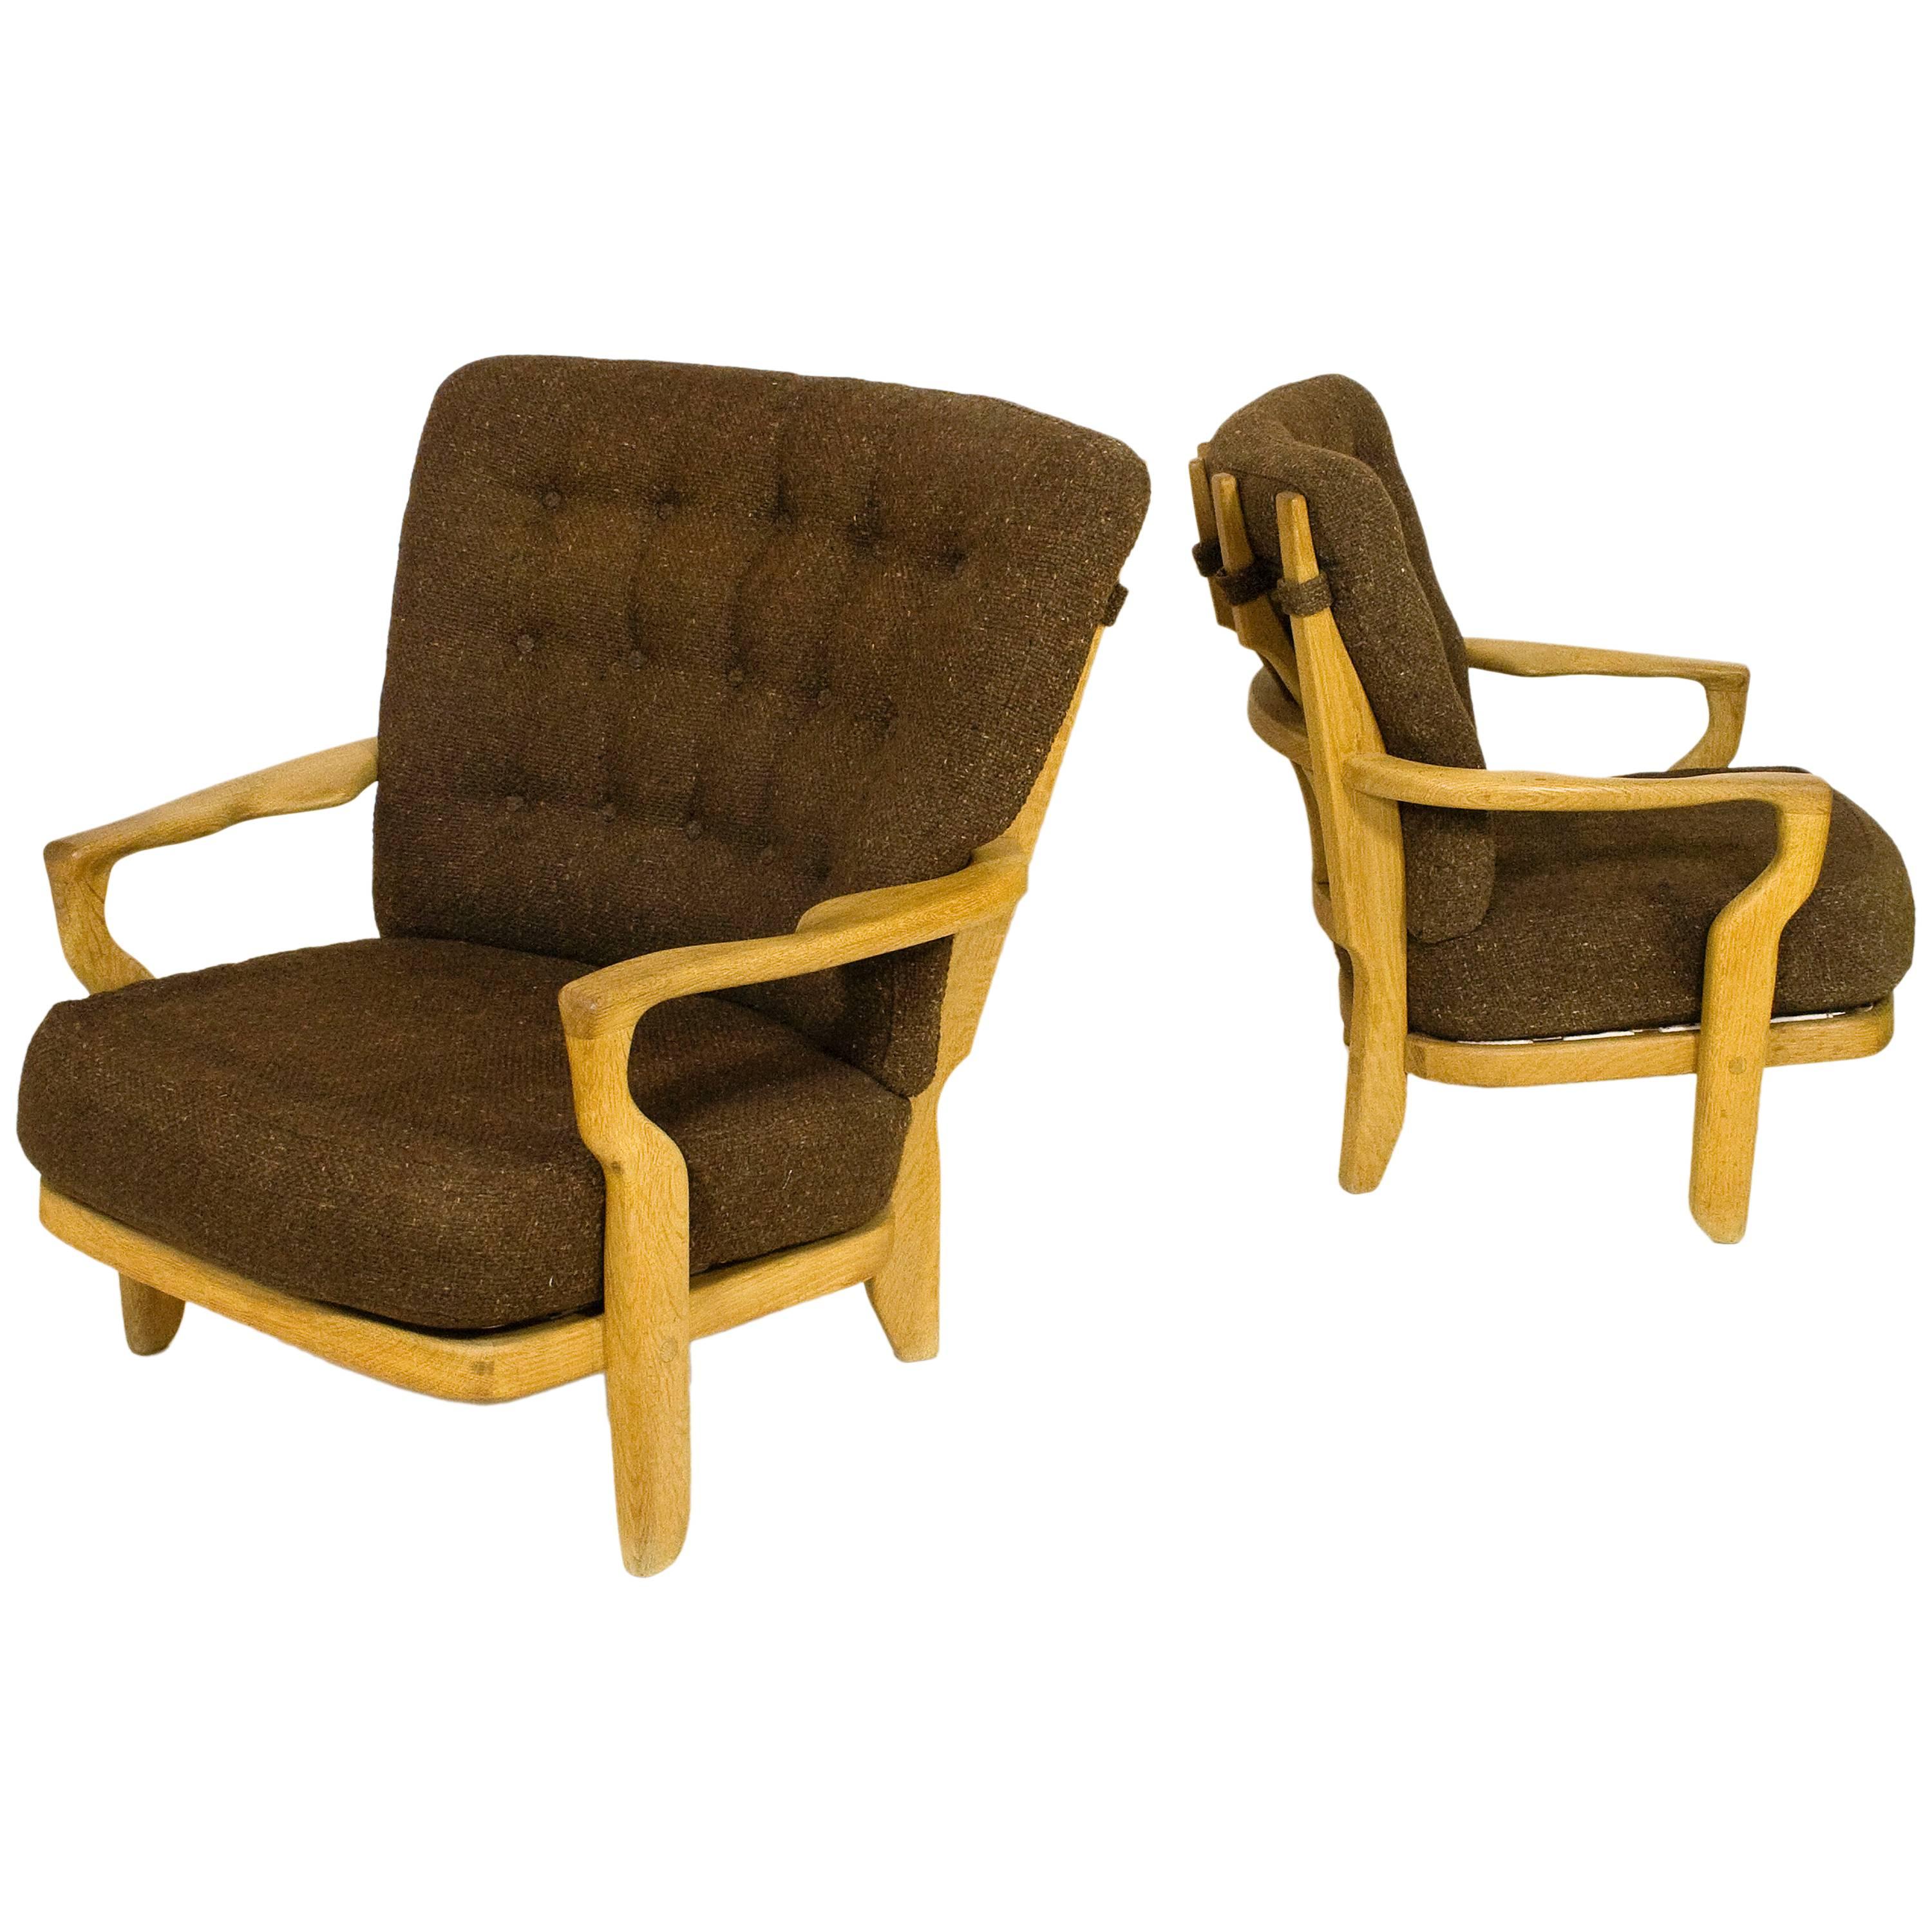 Pair of Guillerme & Chambron "Romeo & Juliette" Armchairs, circa 1950, France